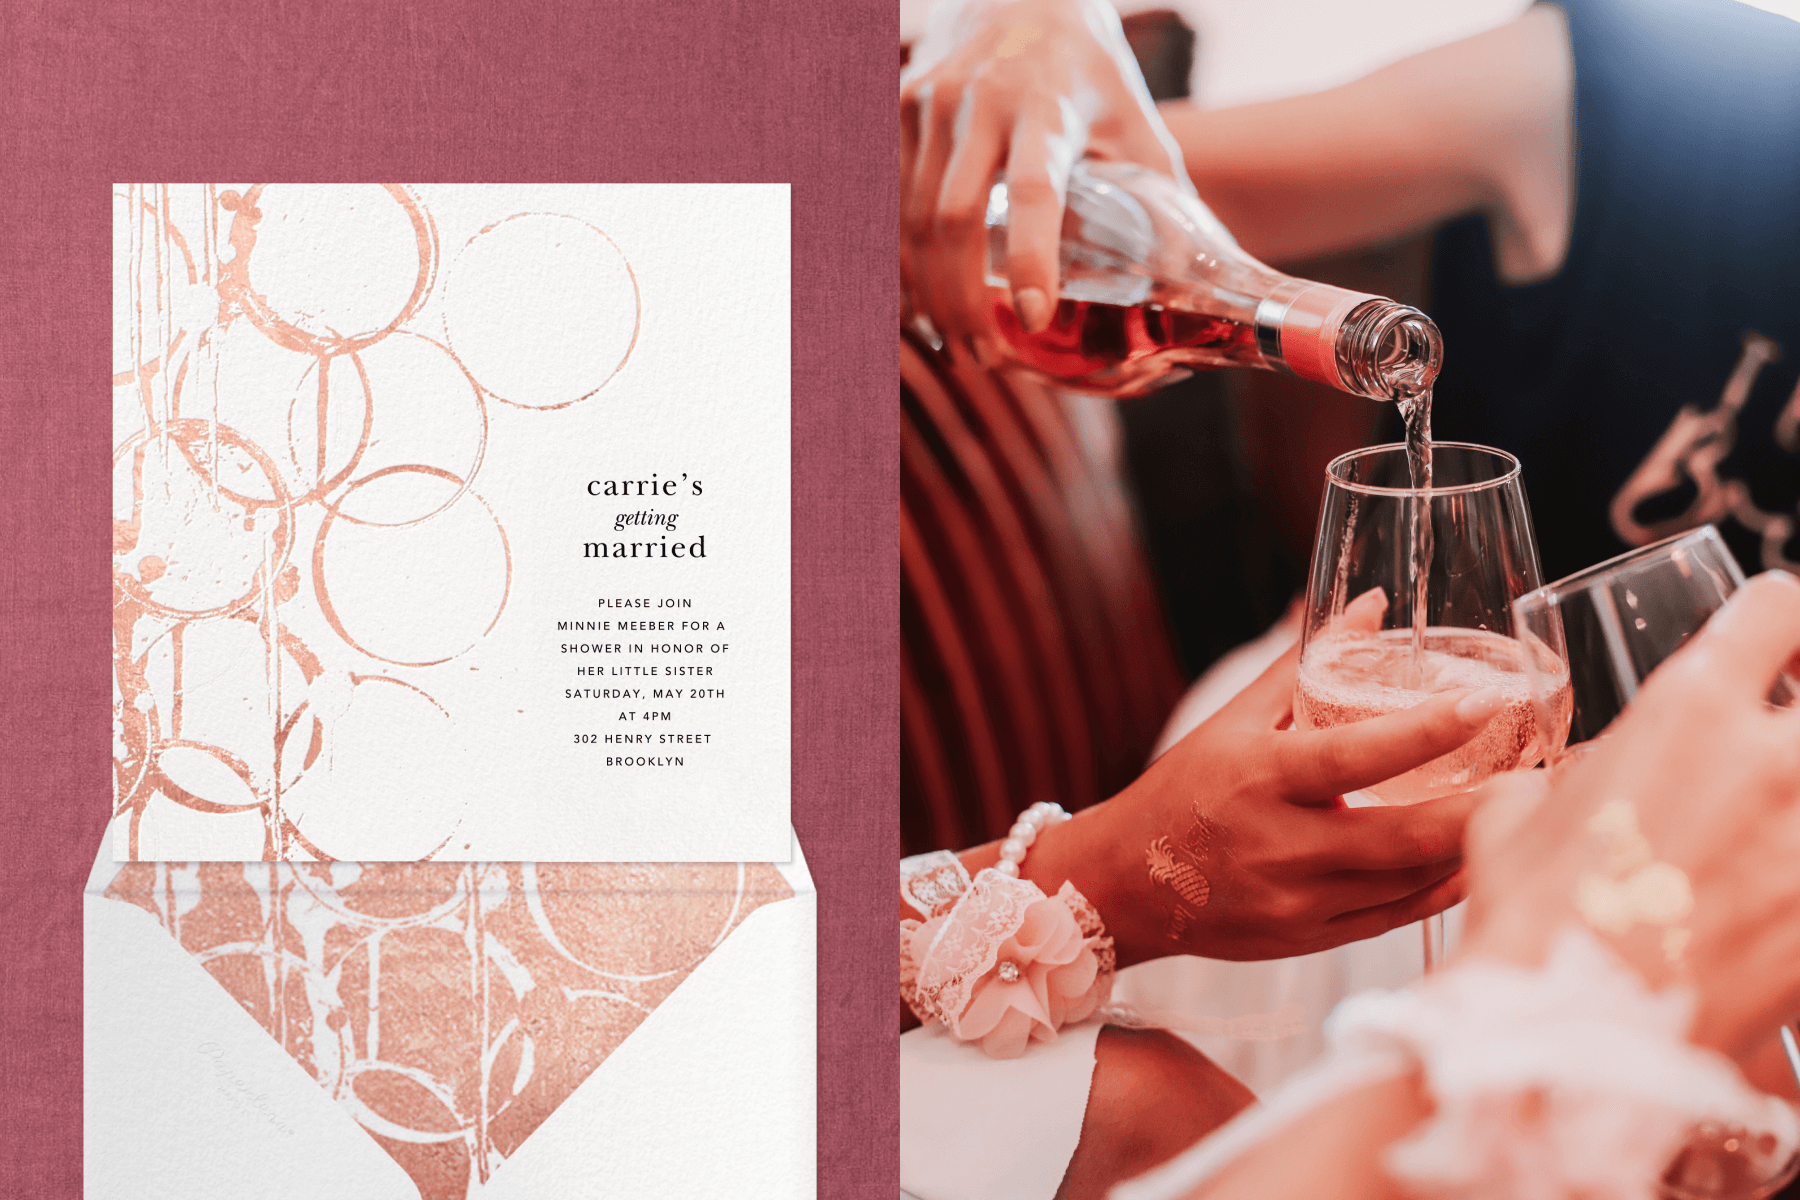 Left: A bridal shower invitation with abstract ring shapes. Right: Rosé wine is poured into a wine glass.